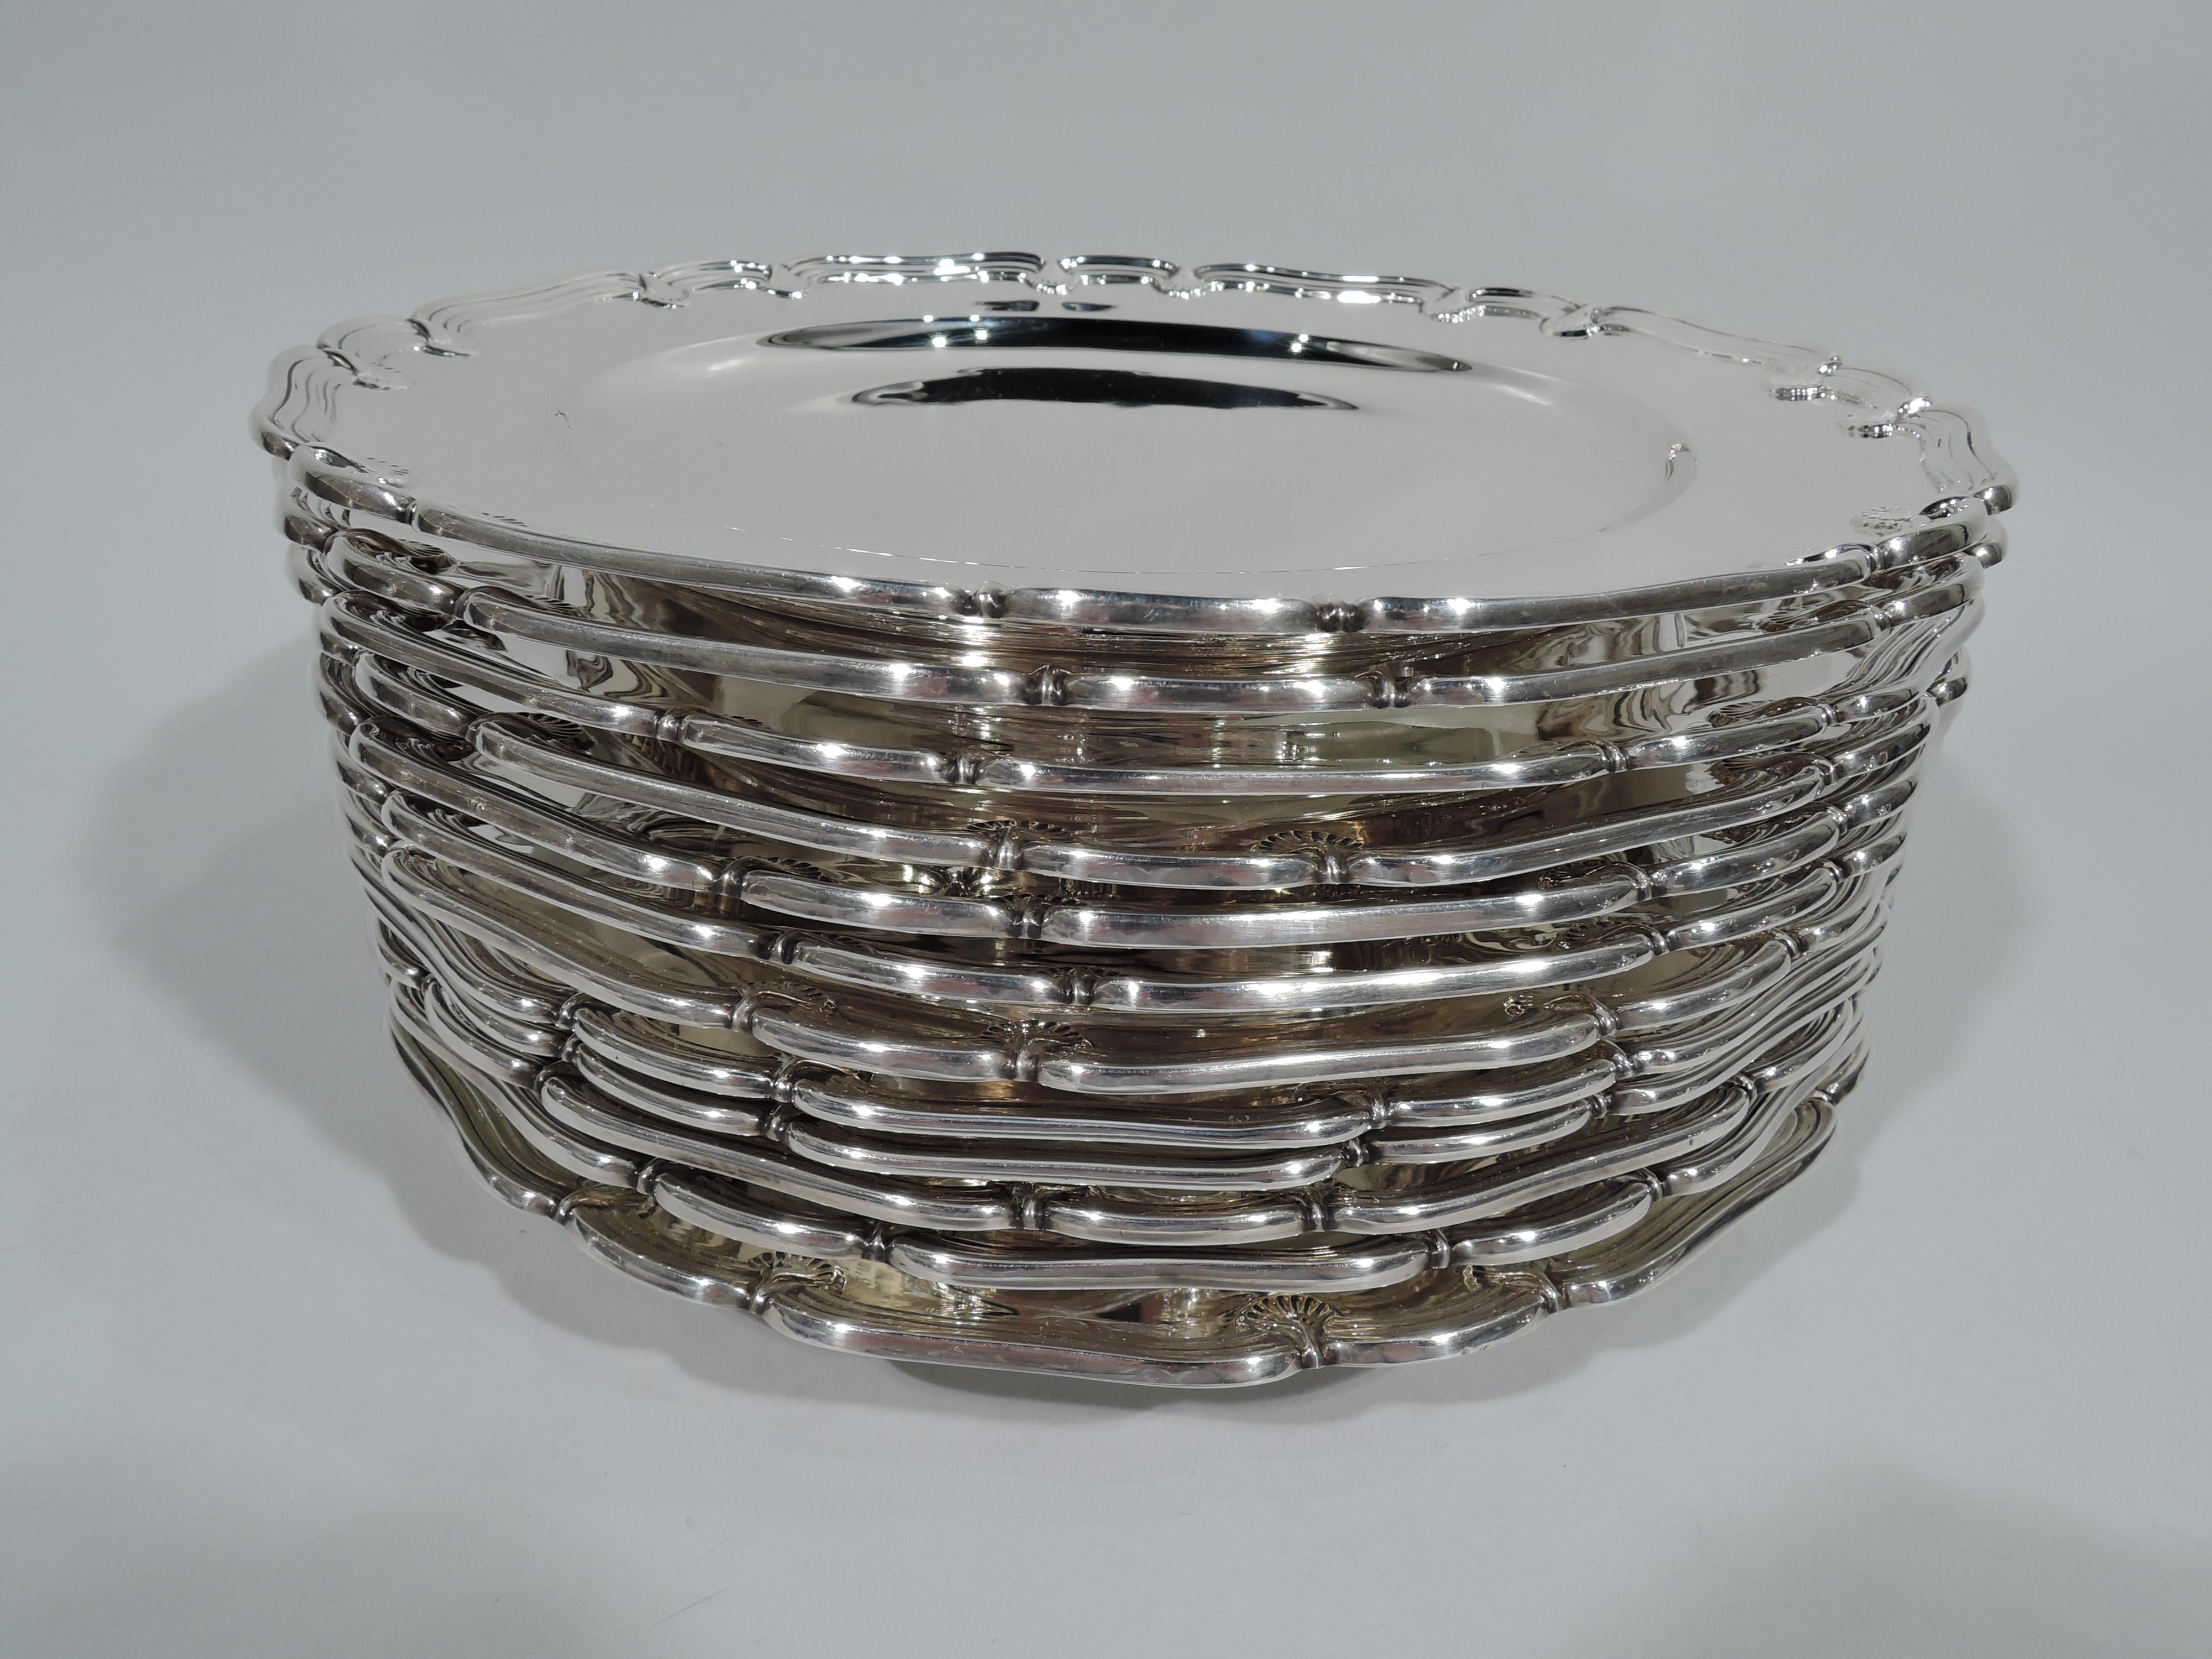 Set of 12 sterling silver appetizer plates. Made by Tiffany & Co. in New York, circa 1910. Each: Circular well, short foot, tapering shoulder, and scrolled and molded rim with applied scallop shells. Perfect for the buffet. Hallmark includes pattern